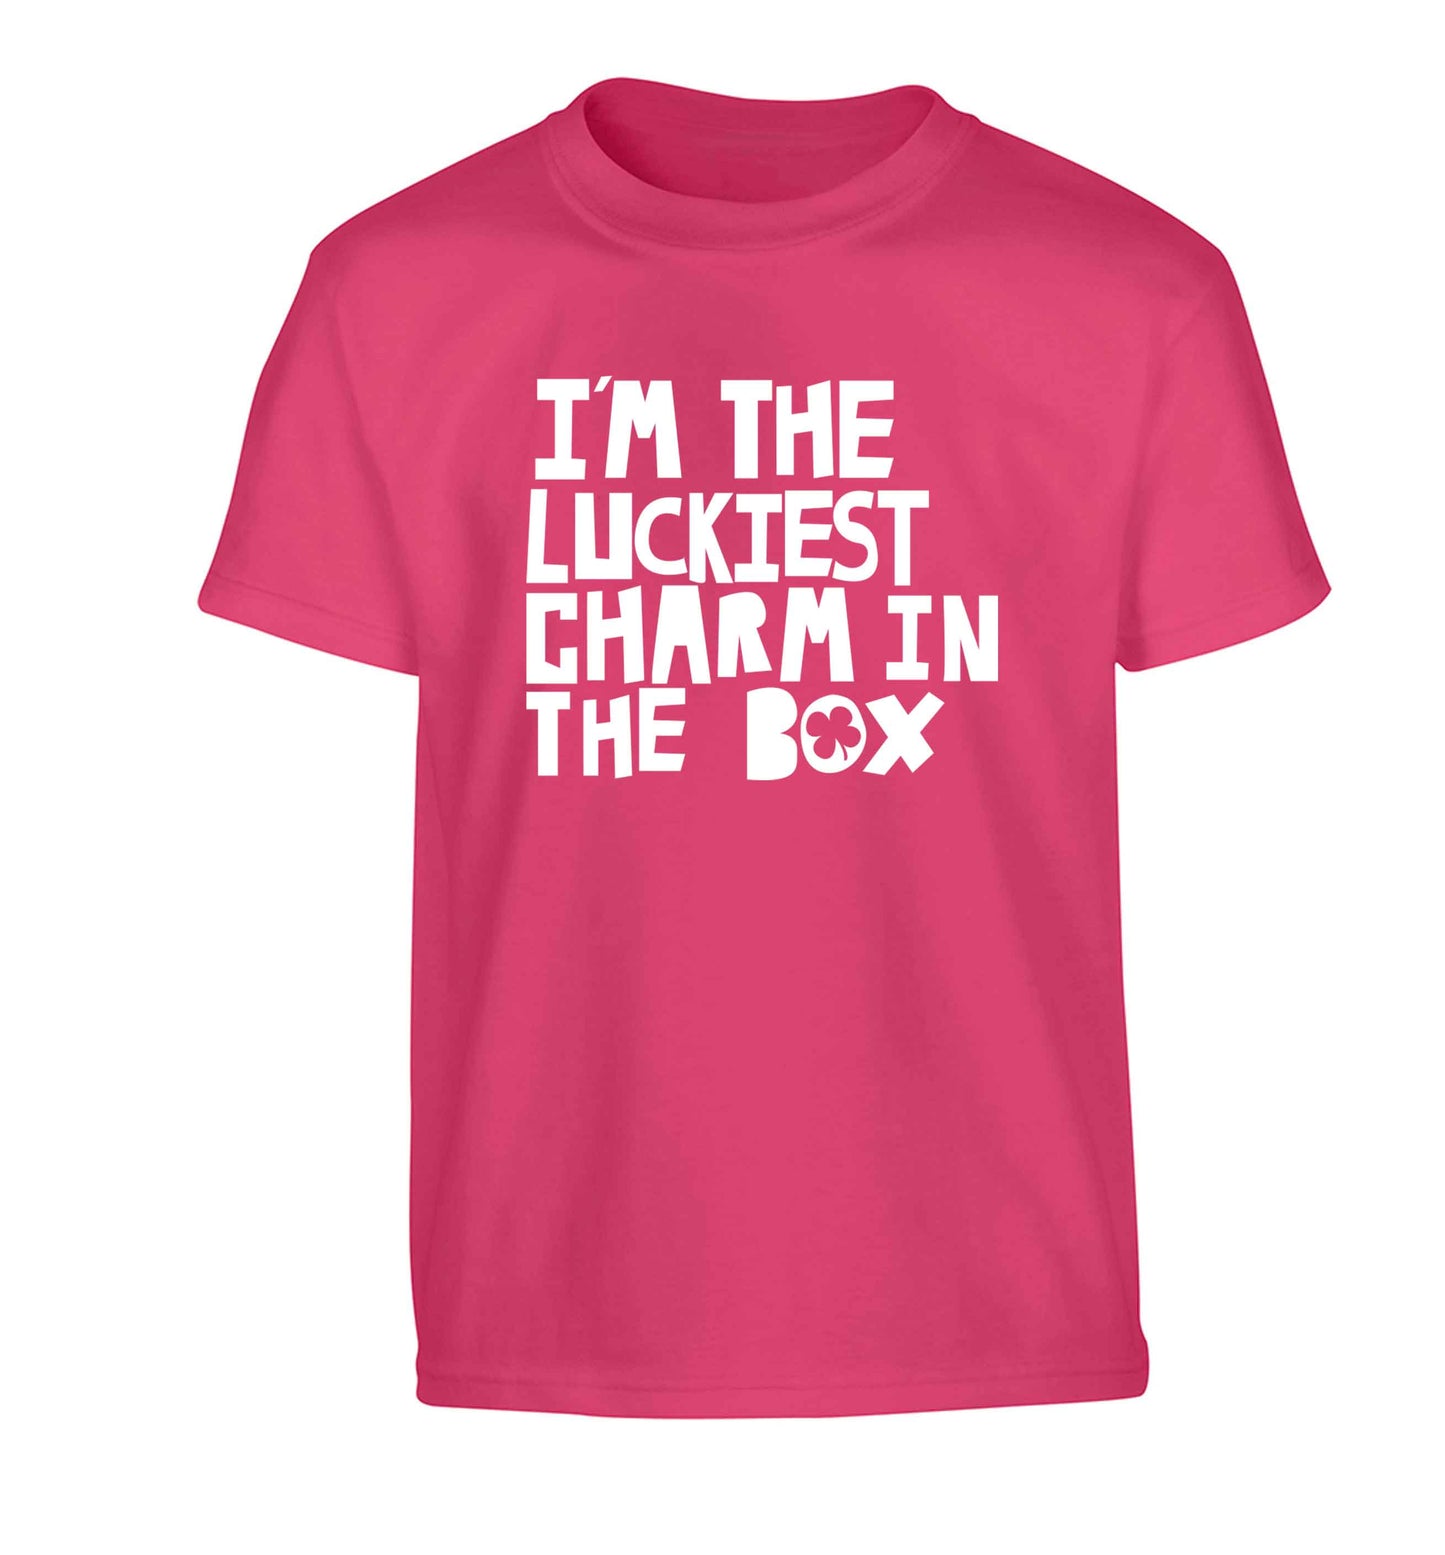 I'm the luckiest charm in the box Children's pink Tshirt 12-13 Years